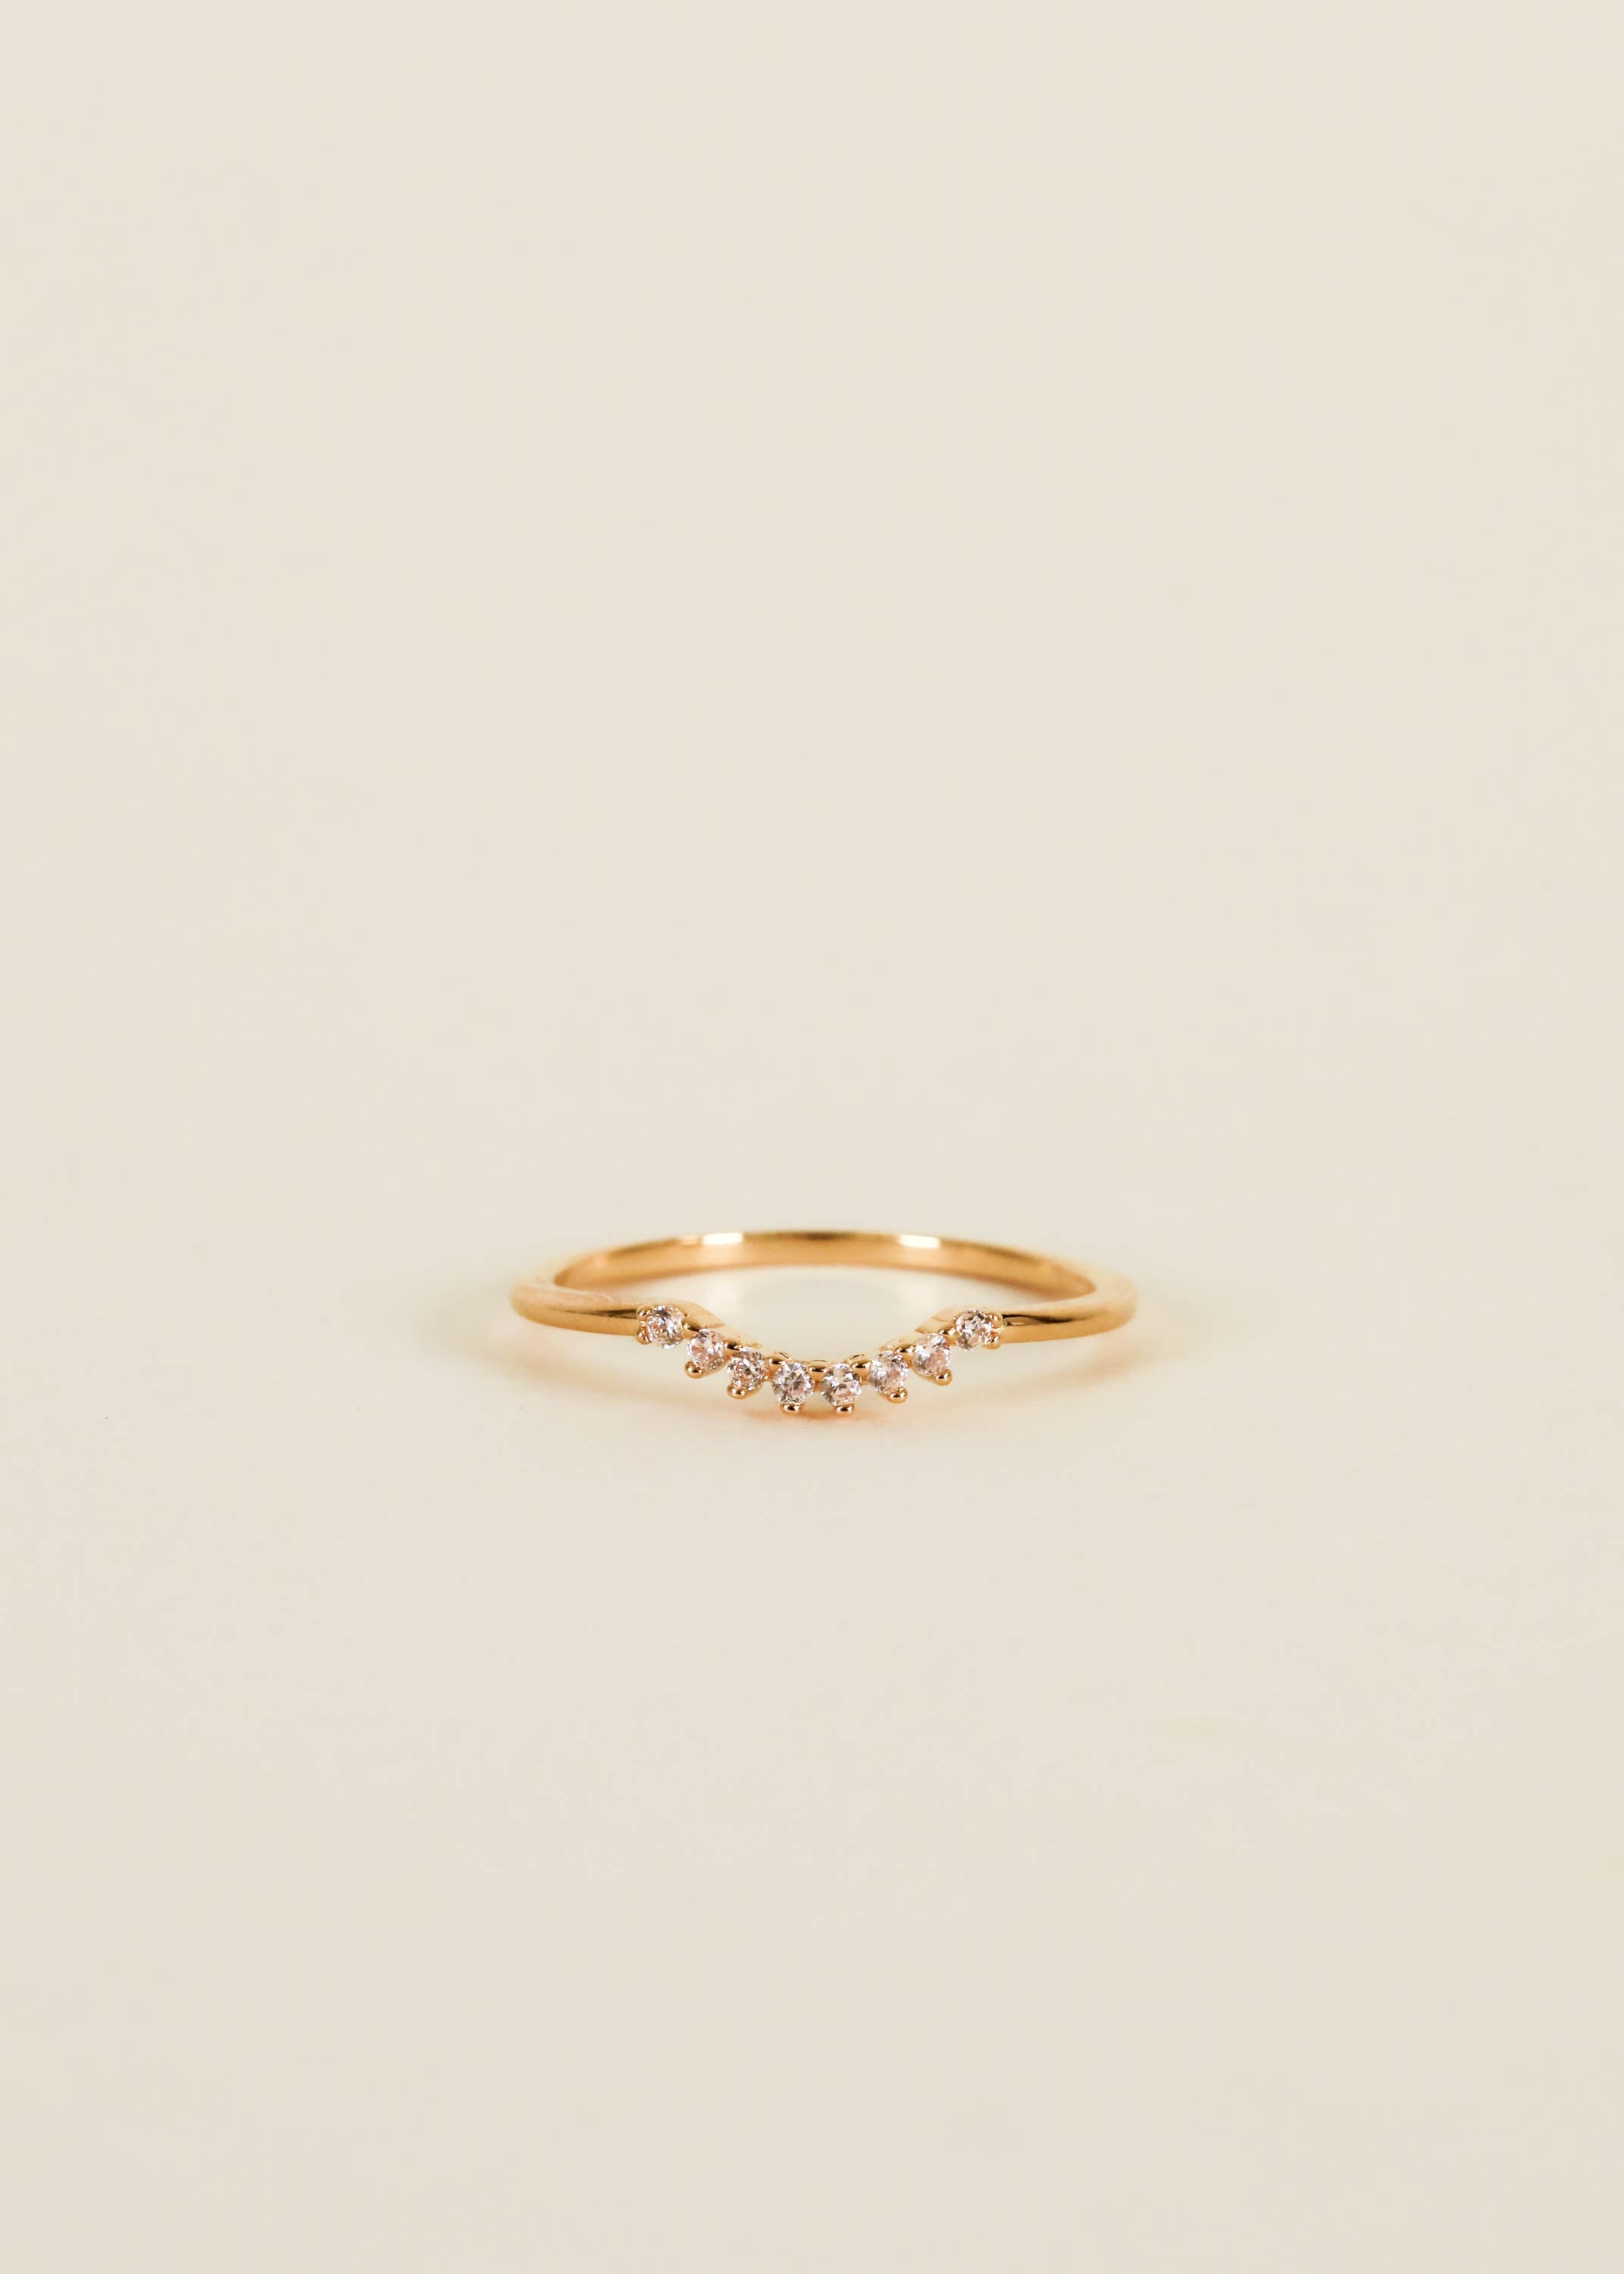 Ring - Arched Crown - Champagne